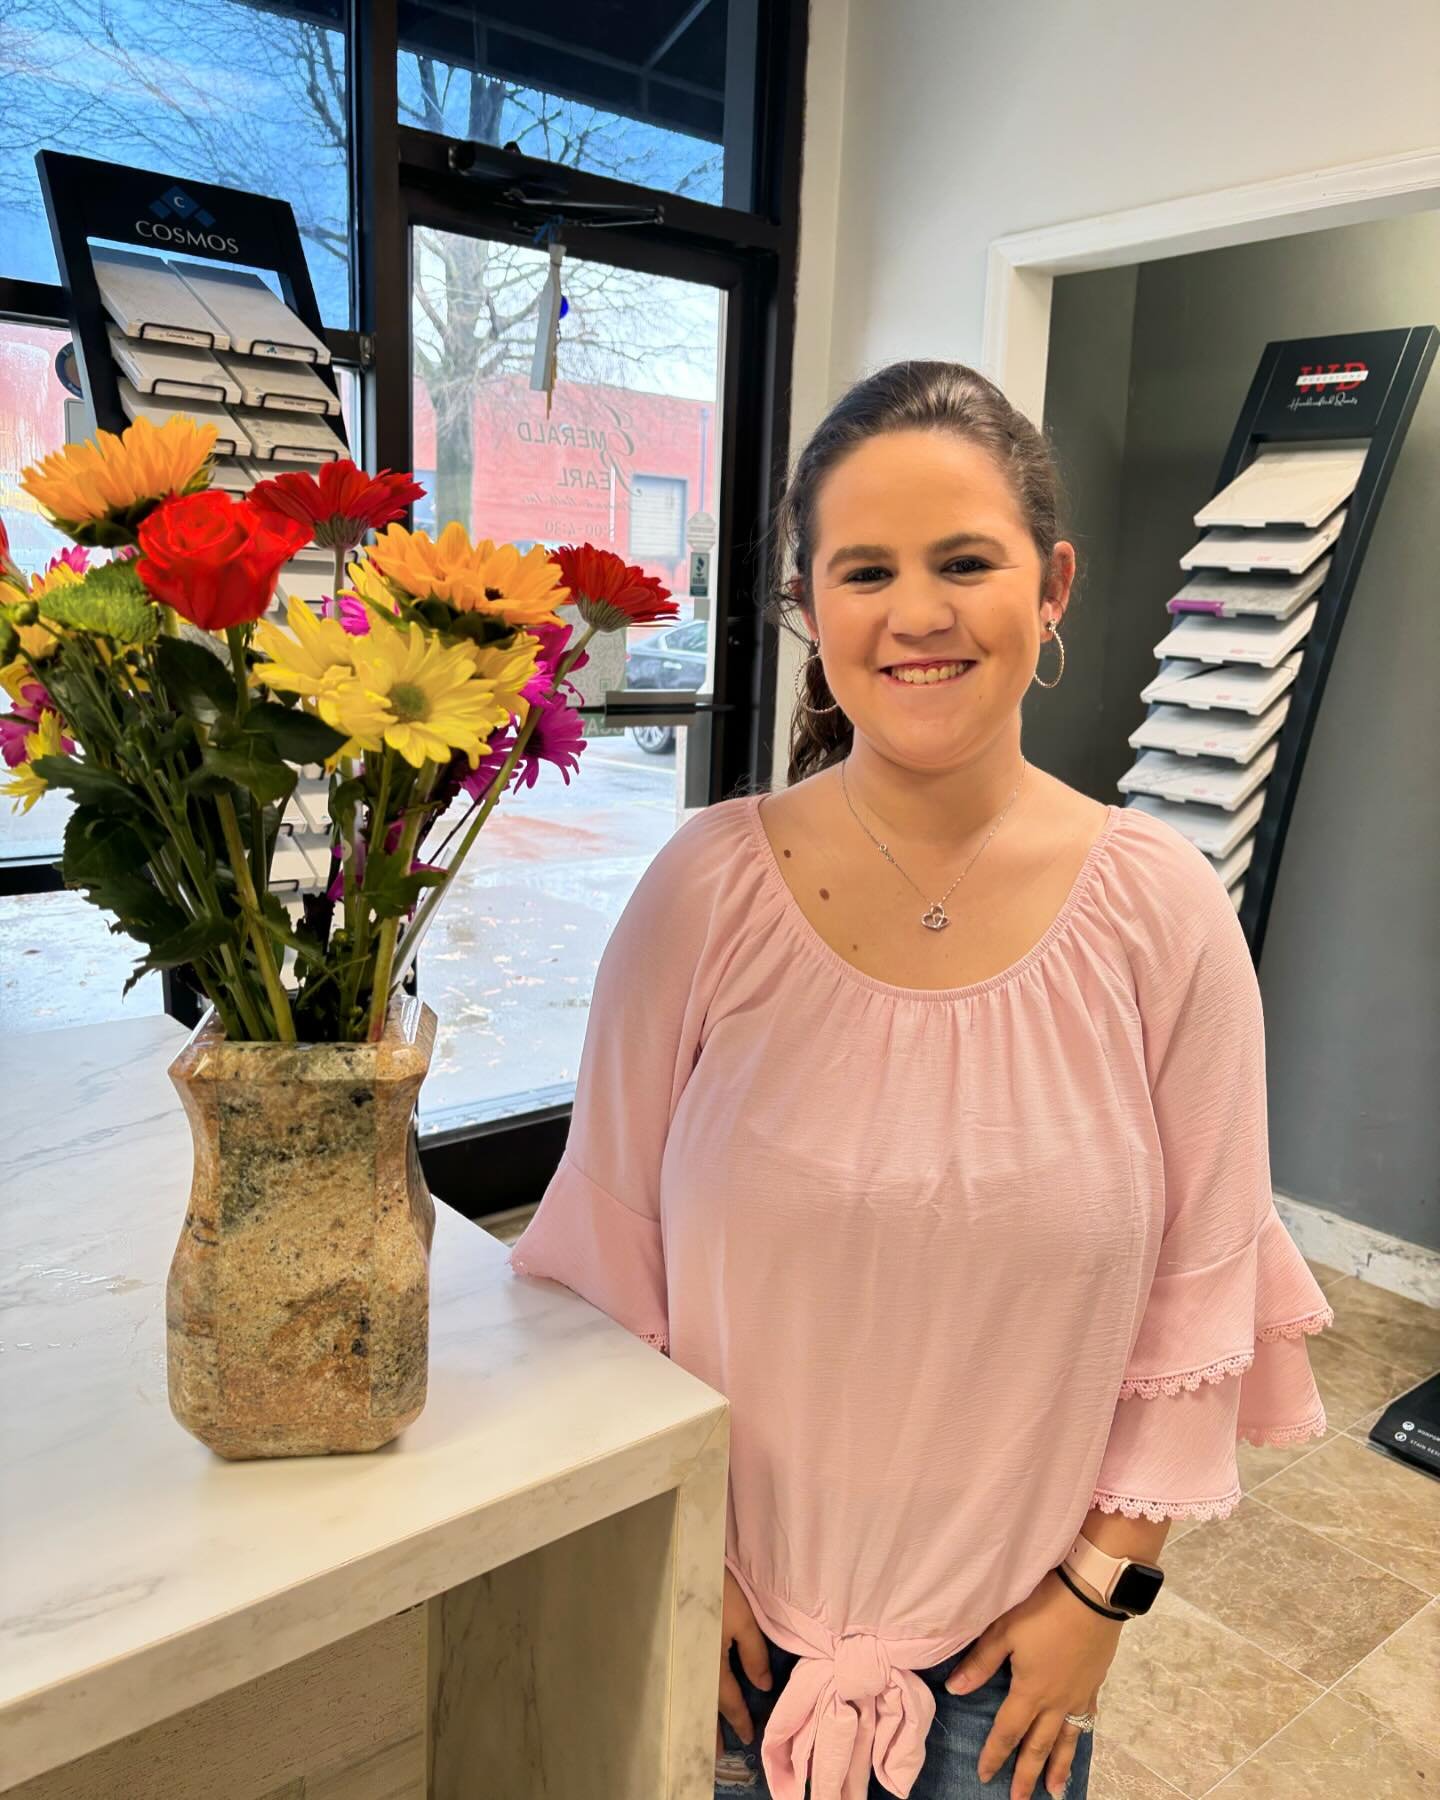 Welcome Kaitlyn!! Emerald Pearl has a new face to help customers.  We are so excited to welcome our new team member.  Call or drop in today to say hi!!
#familyowned #craftmanship#nicepeople#design#twodecadesstrong#kitchen#countertops#marble#quartz#gr